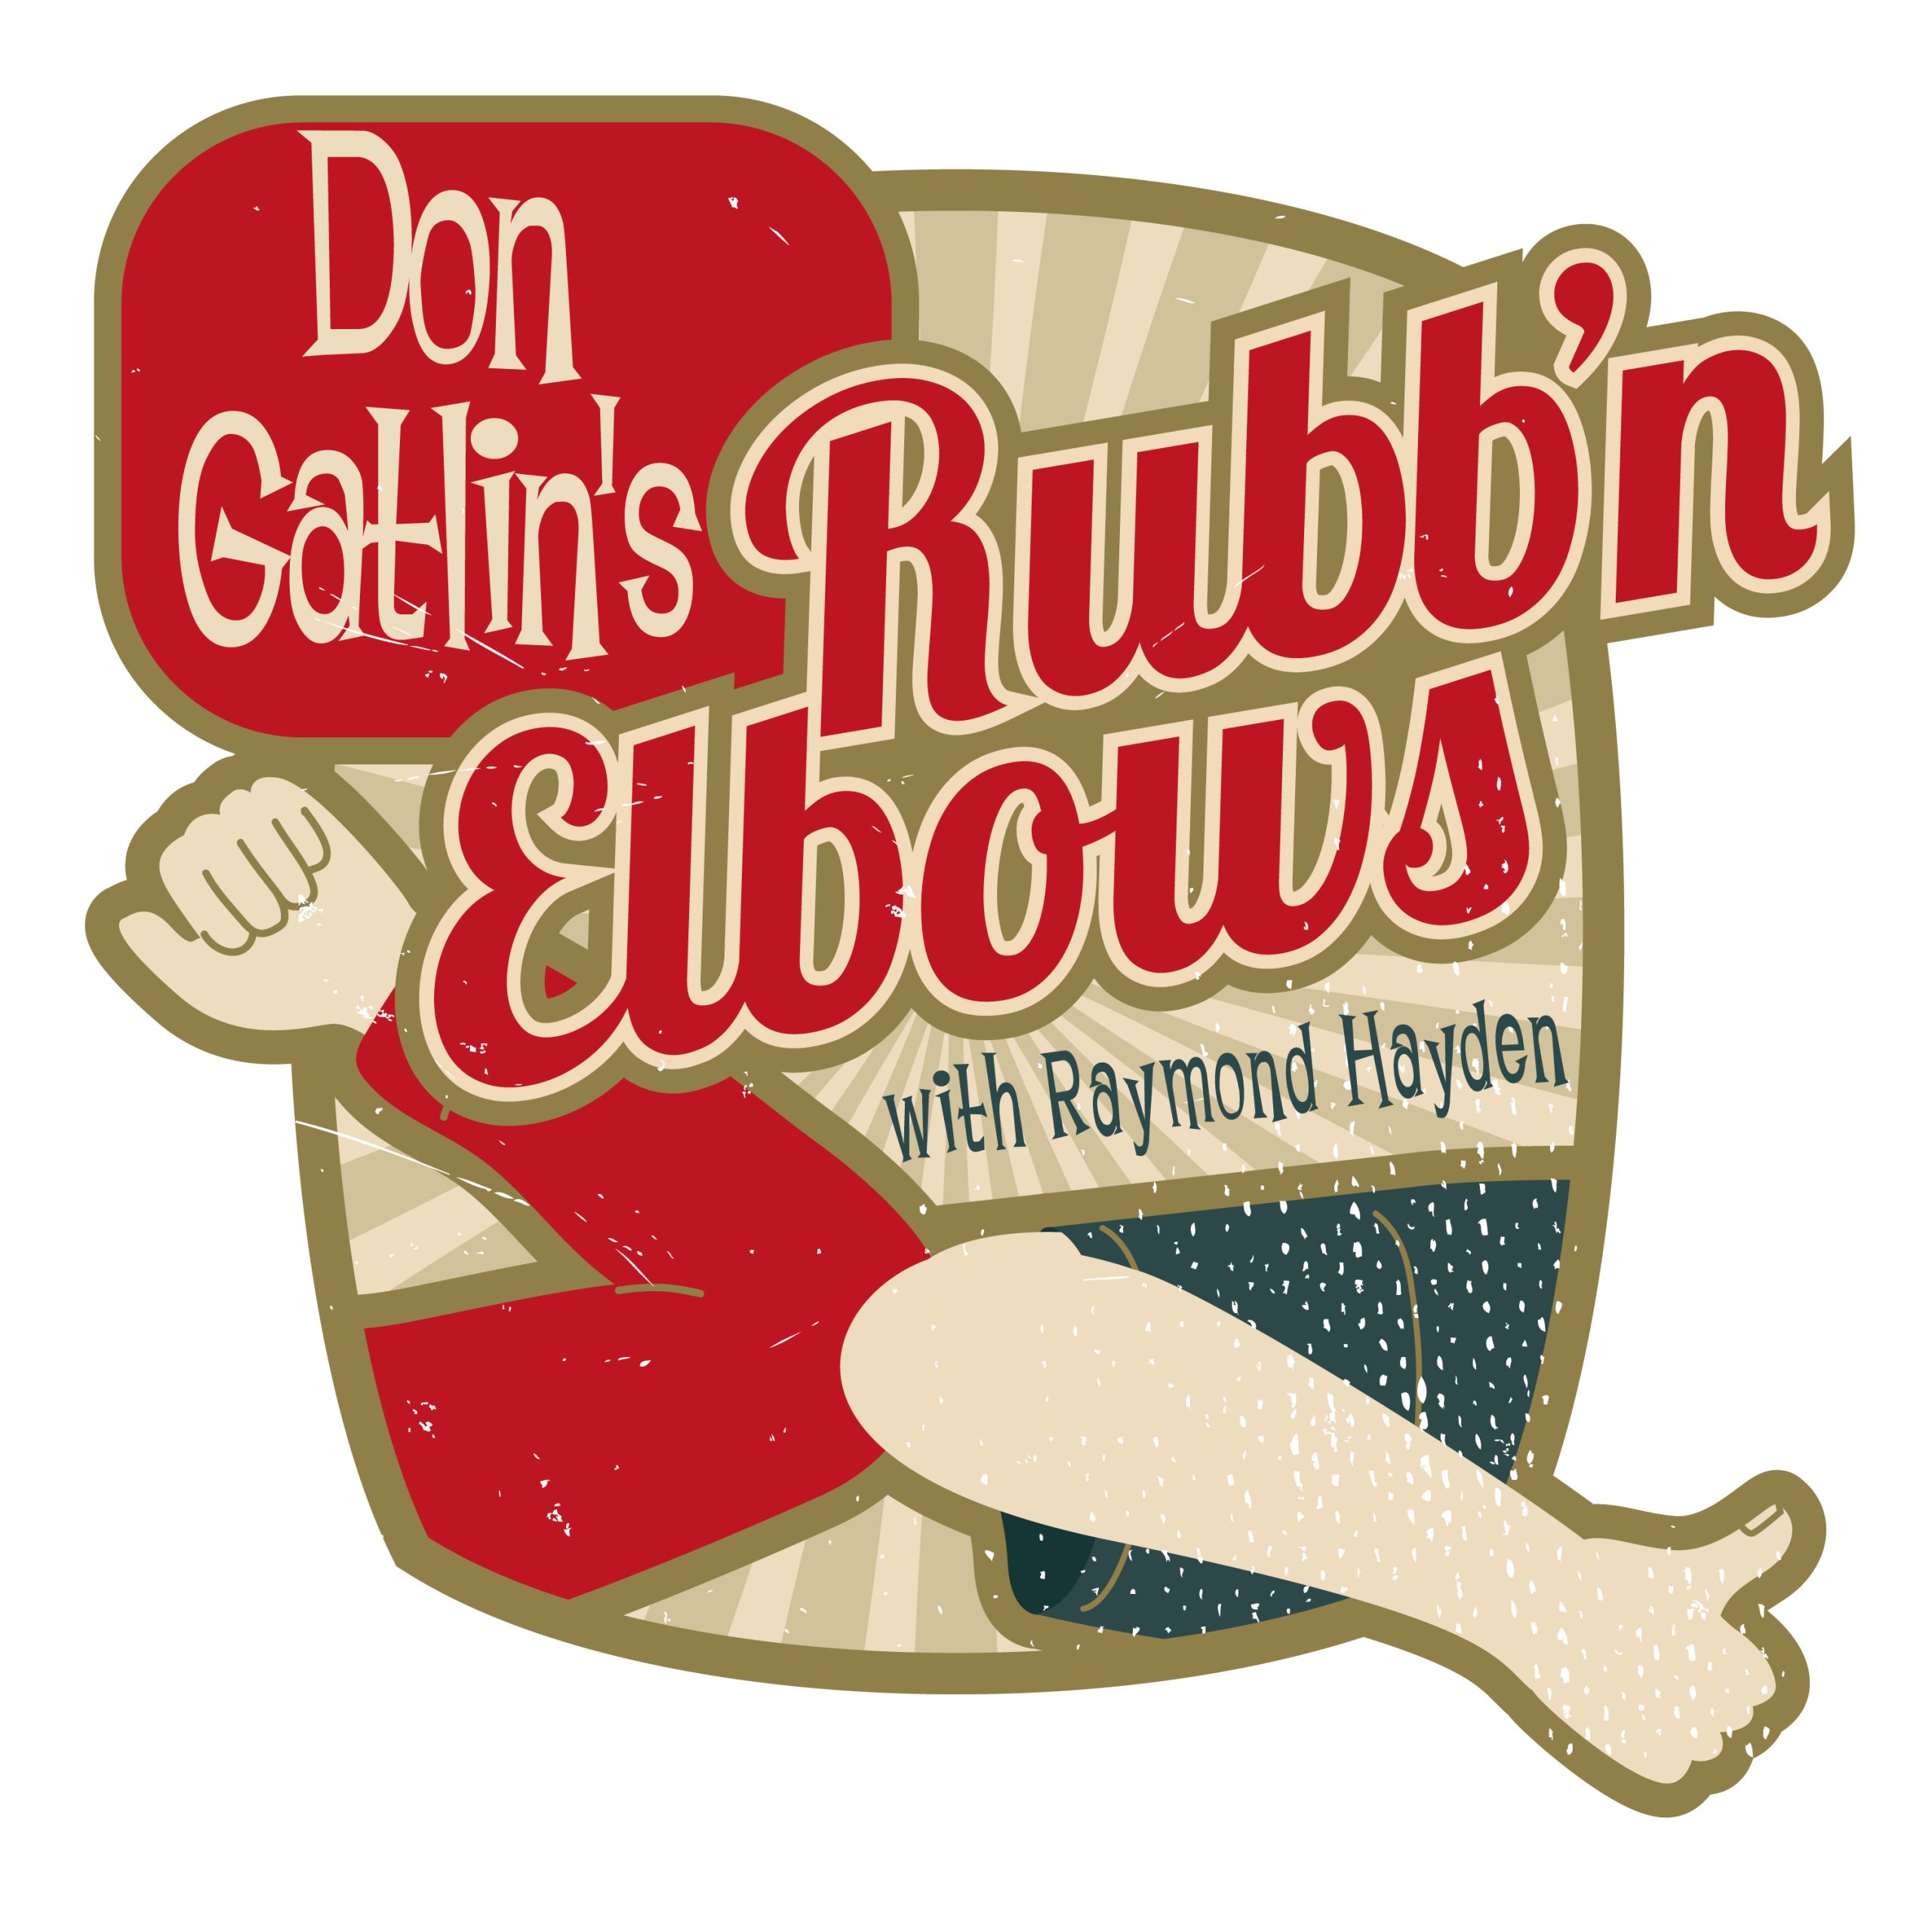 Rubb’n Elbows – Season 1 / Ep 6 with guest Bruce Bouton